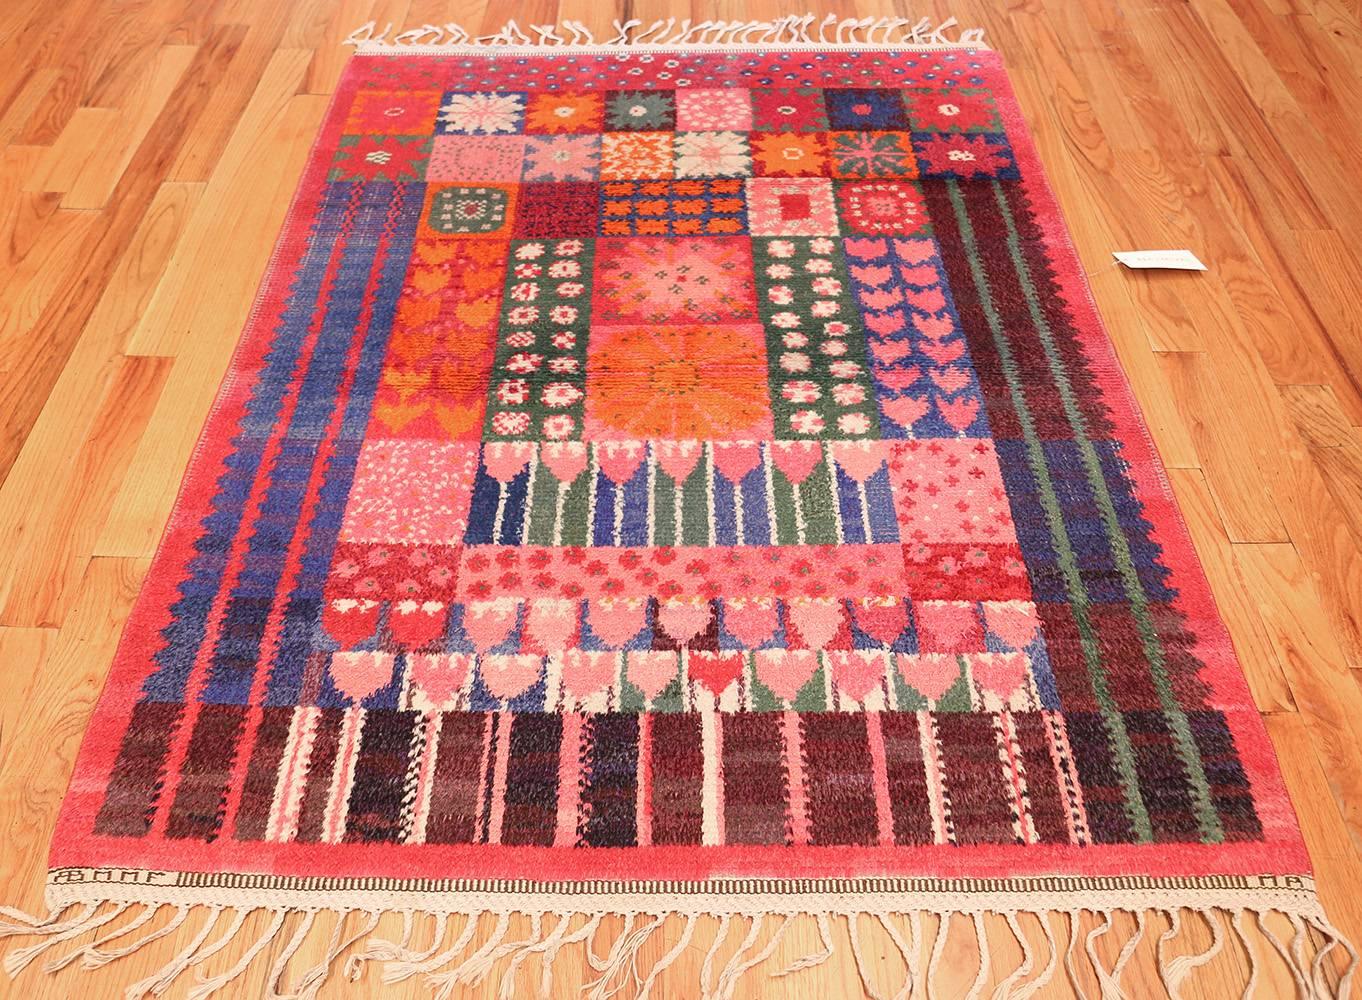 Mid-Century Modern Vintage Rya Rug by Marianne Richter for Marta Maas. Size: 4 ft 6 in x 5 ft 8 in